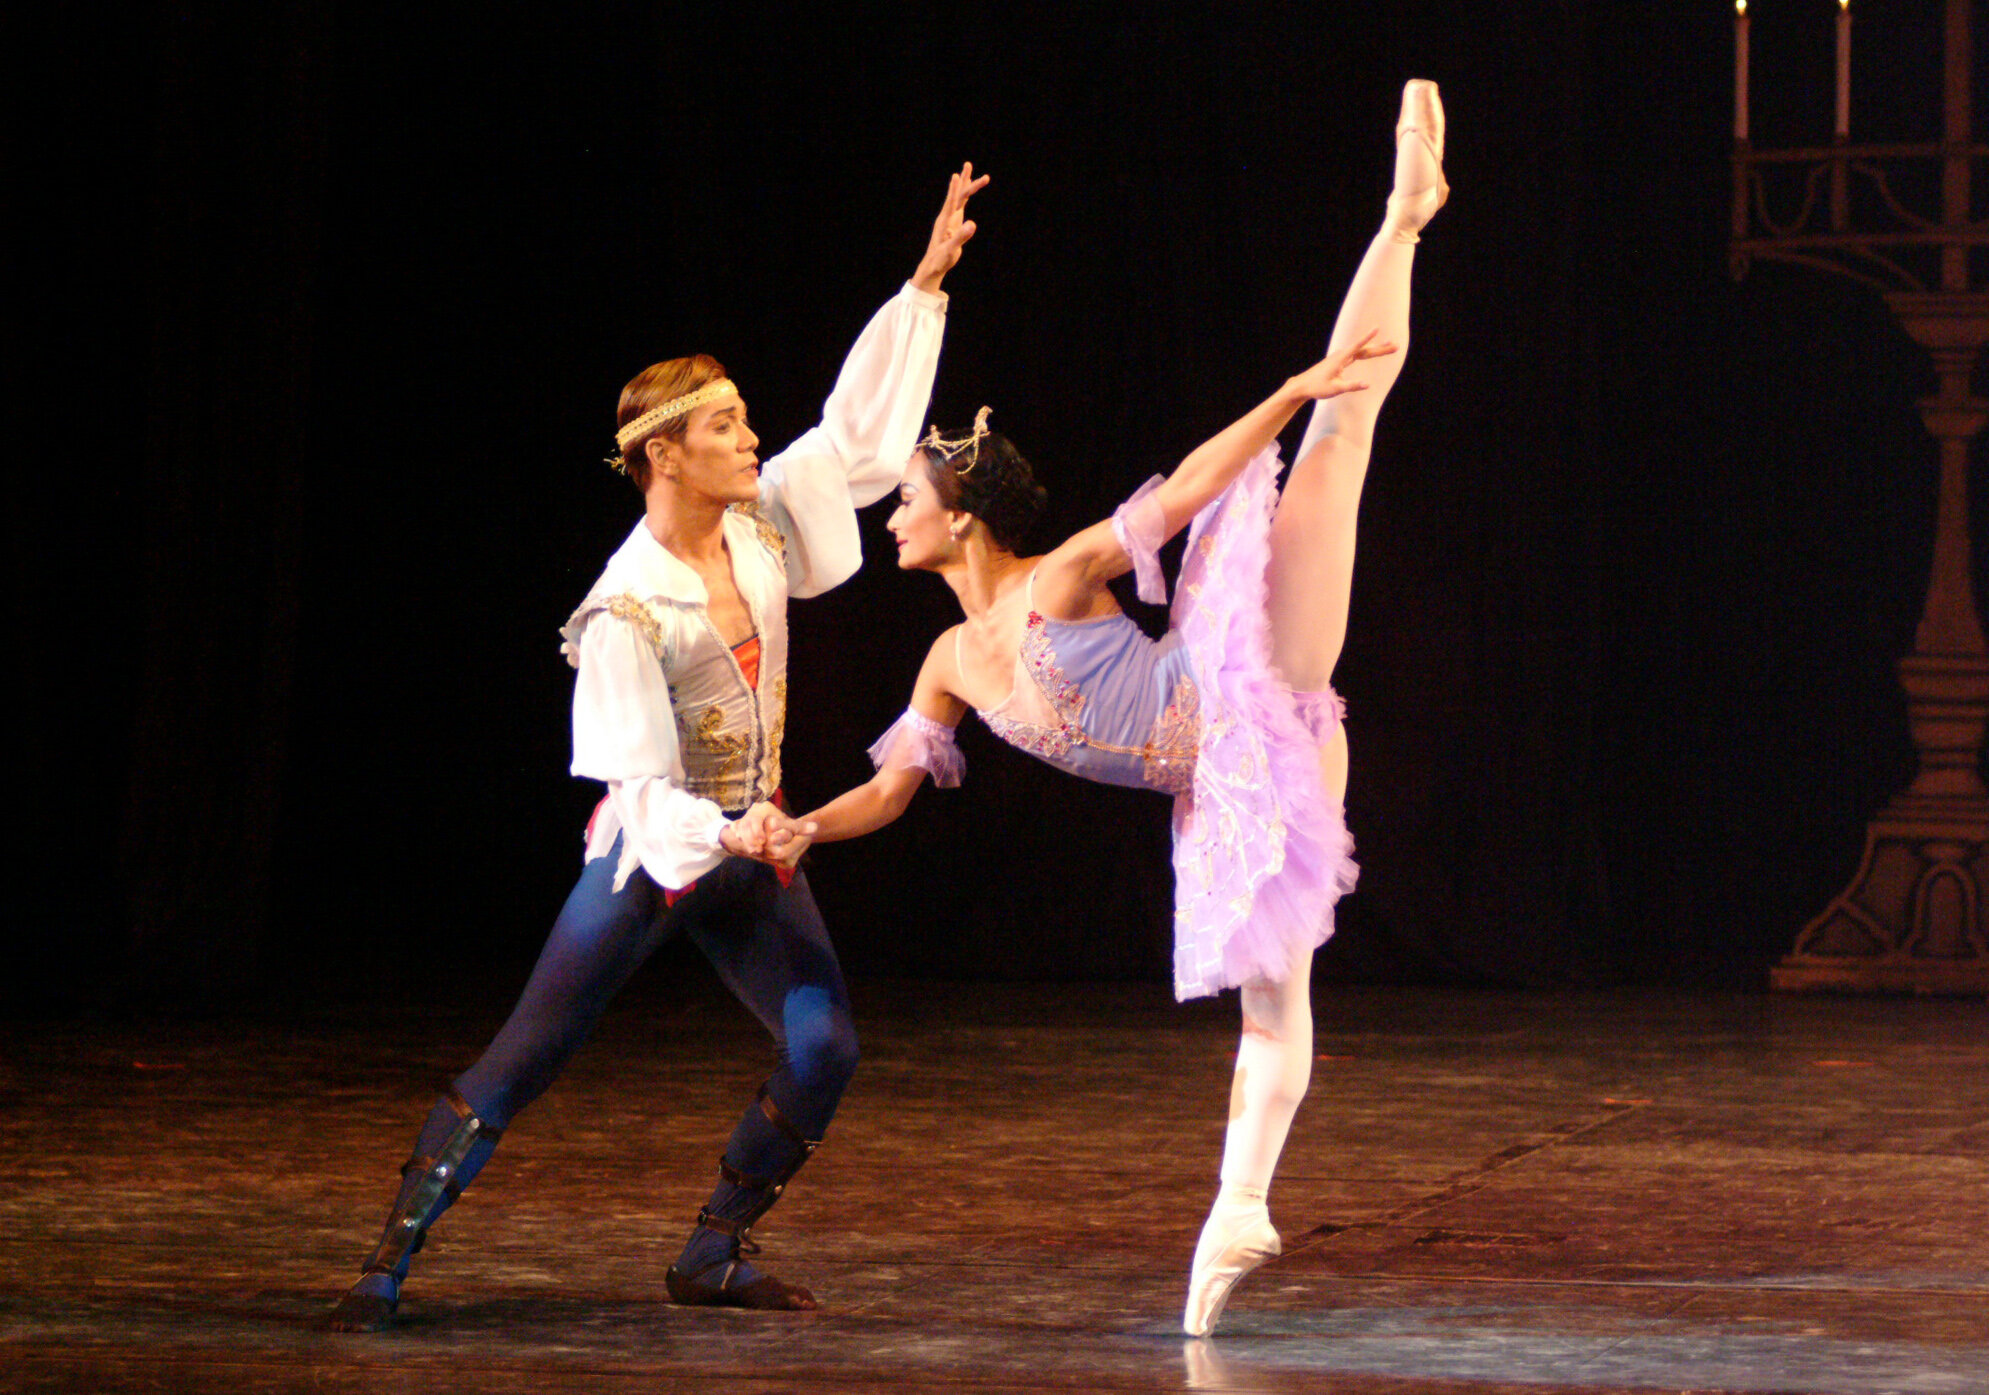    &nbsp;Lisa Macuja-Elizalde dons a tutu in soft tones of lavender and lilac for her turn as Medora in  Le Corsaire,  with Osias Barroso as her Conrad in 2004. The pirate adventure follows a damsel-in-distress plot as Conrad comes to Medora’s rescue